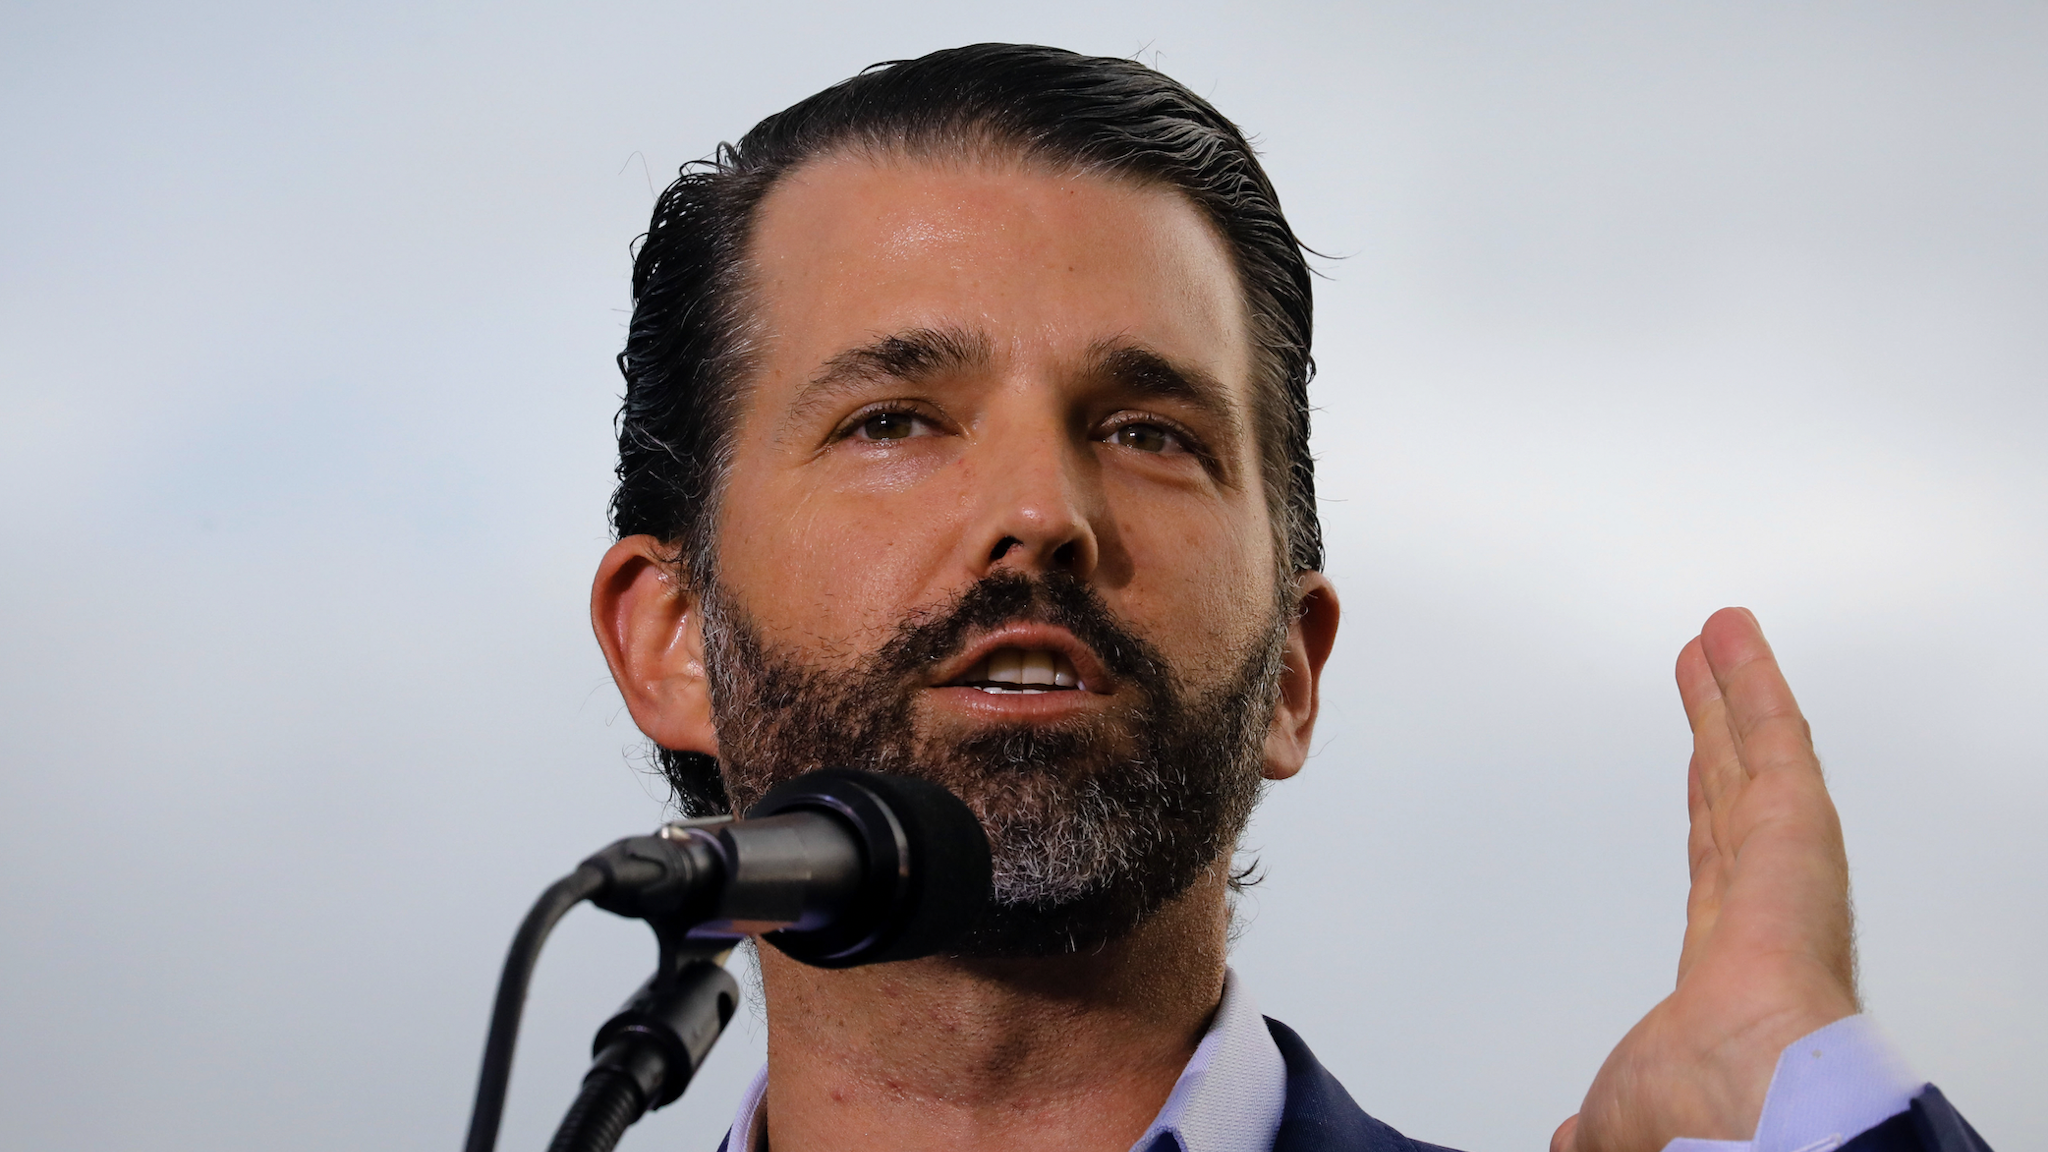 SARASOTA, FL - JULY 03: Donald J. Trump Jr. speaks during a rally on July 3, 2021 in Sarasota, Florida. Co-sponsored by the Republican Party of Florida, the rally marks Trump's further support of the MAGA agenda and accomplishments of his administration.